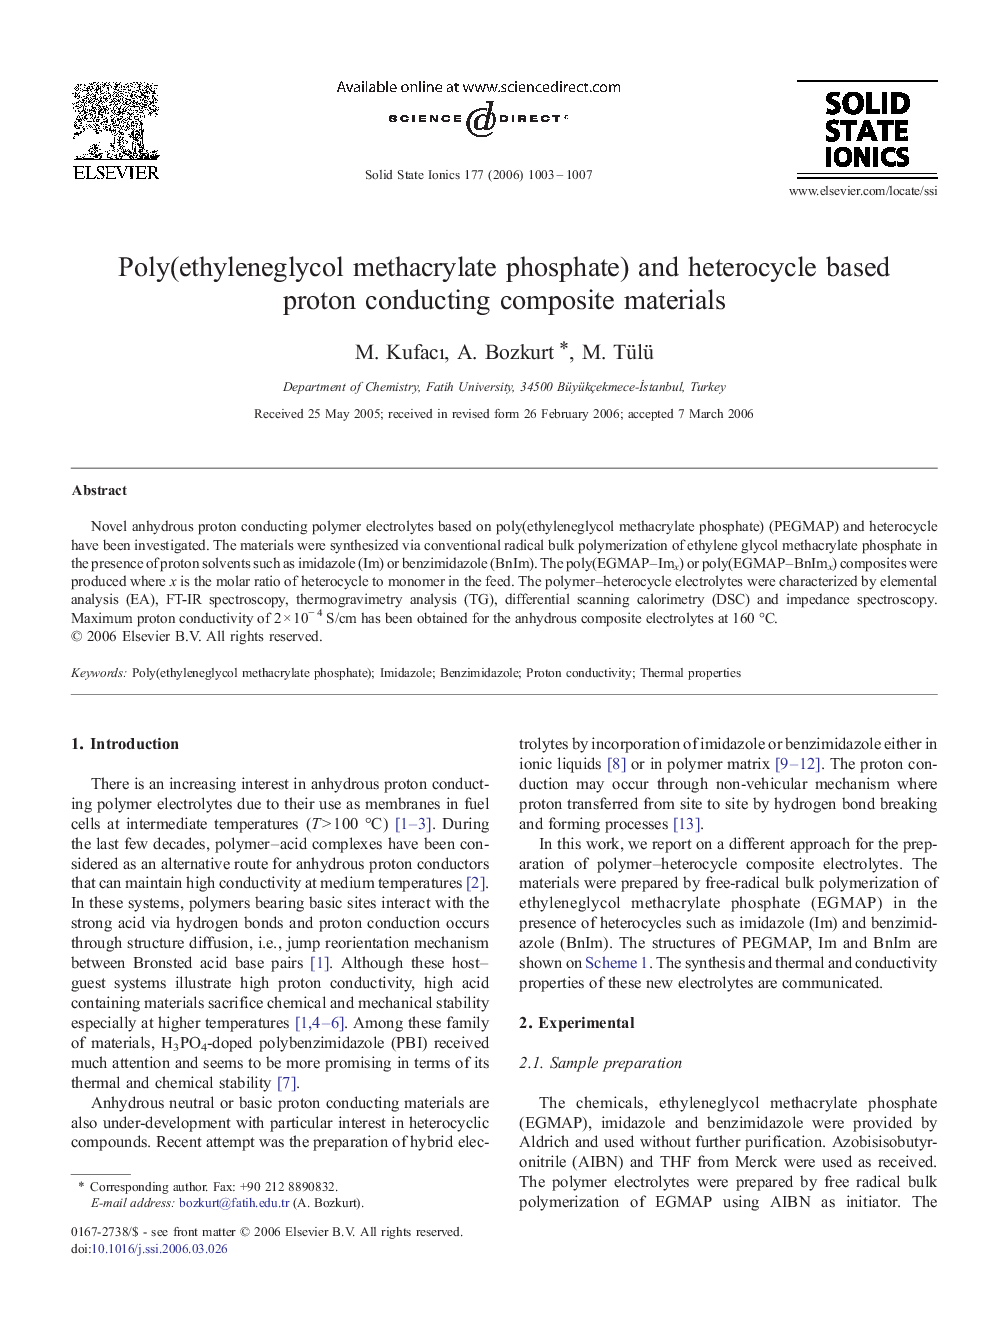 Poly(ethyleneglycol methacrylate phosphate) and heterocycle based proton conducting composite materials